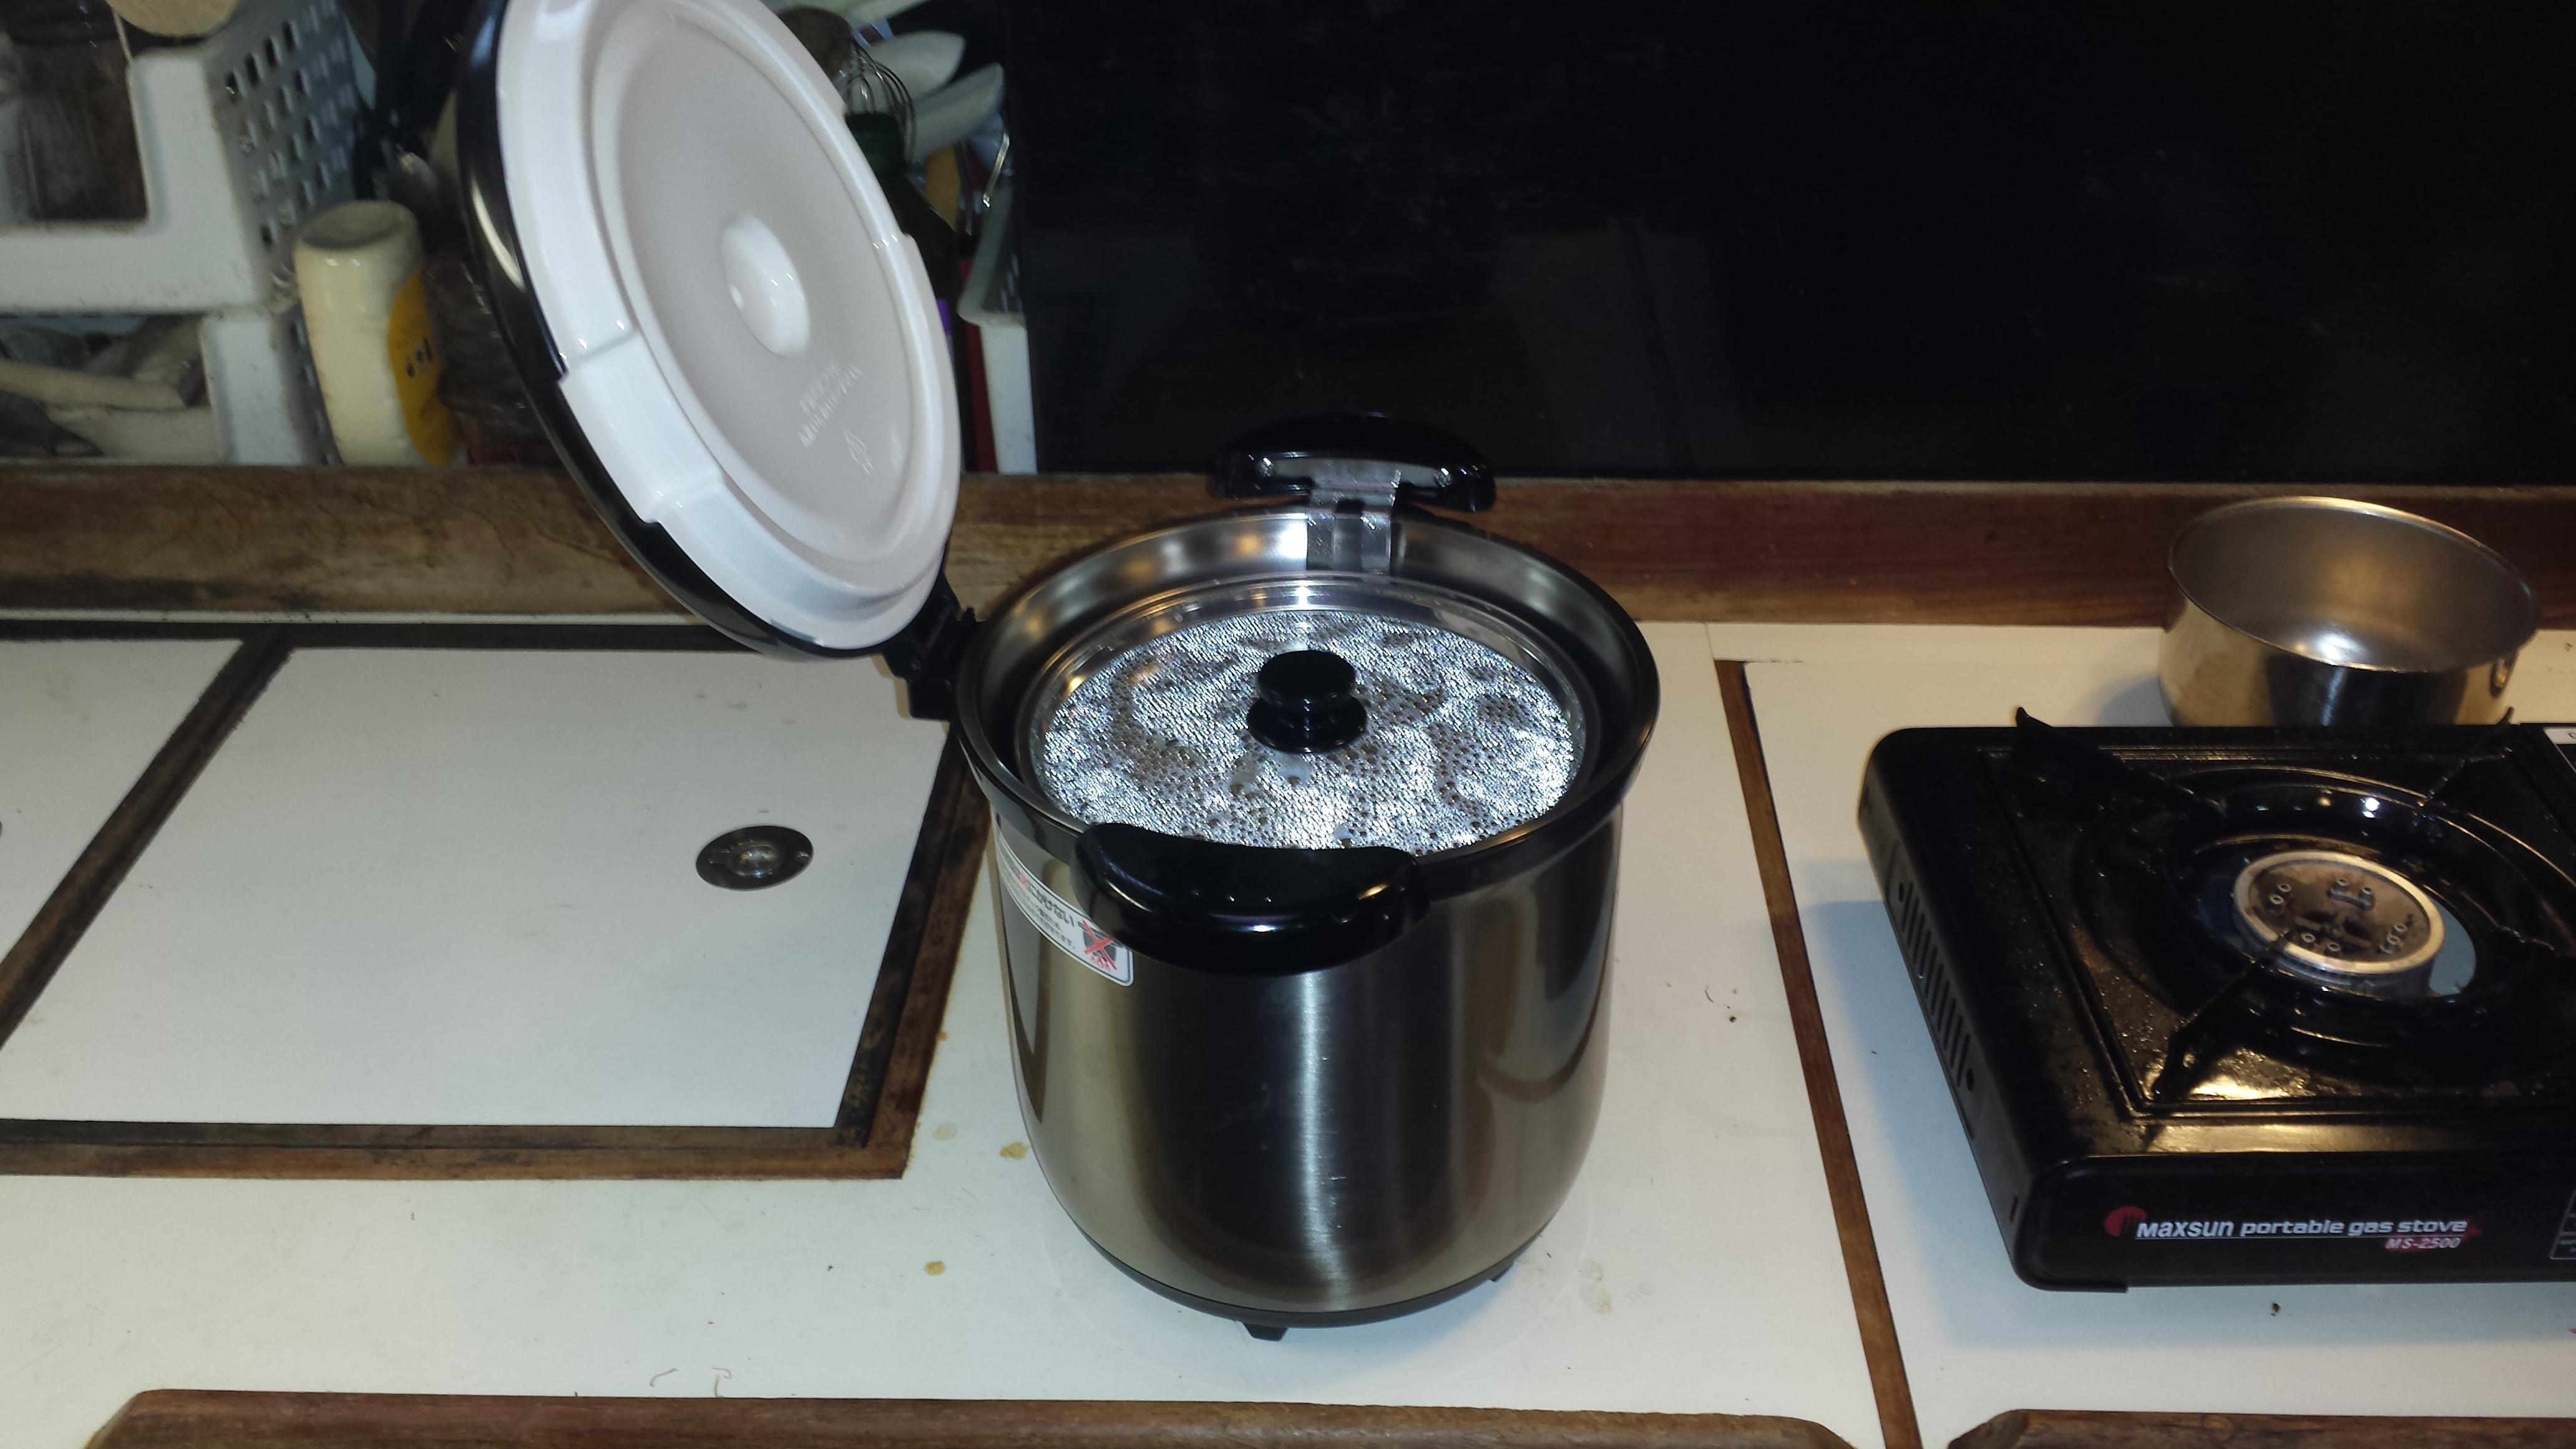 Thermal Cooker - The Boat Galley